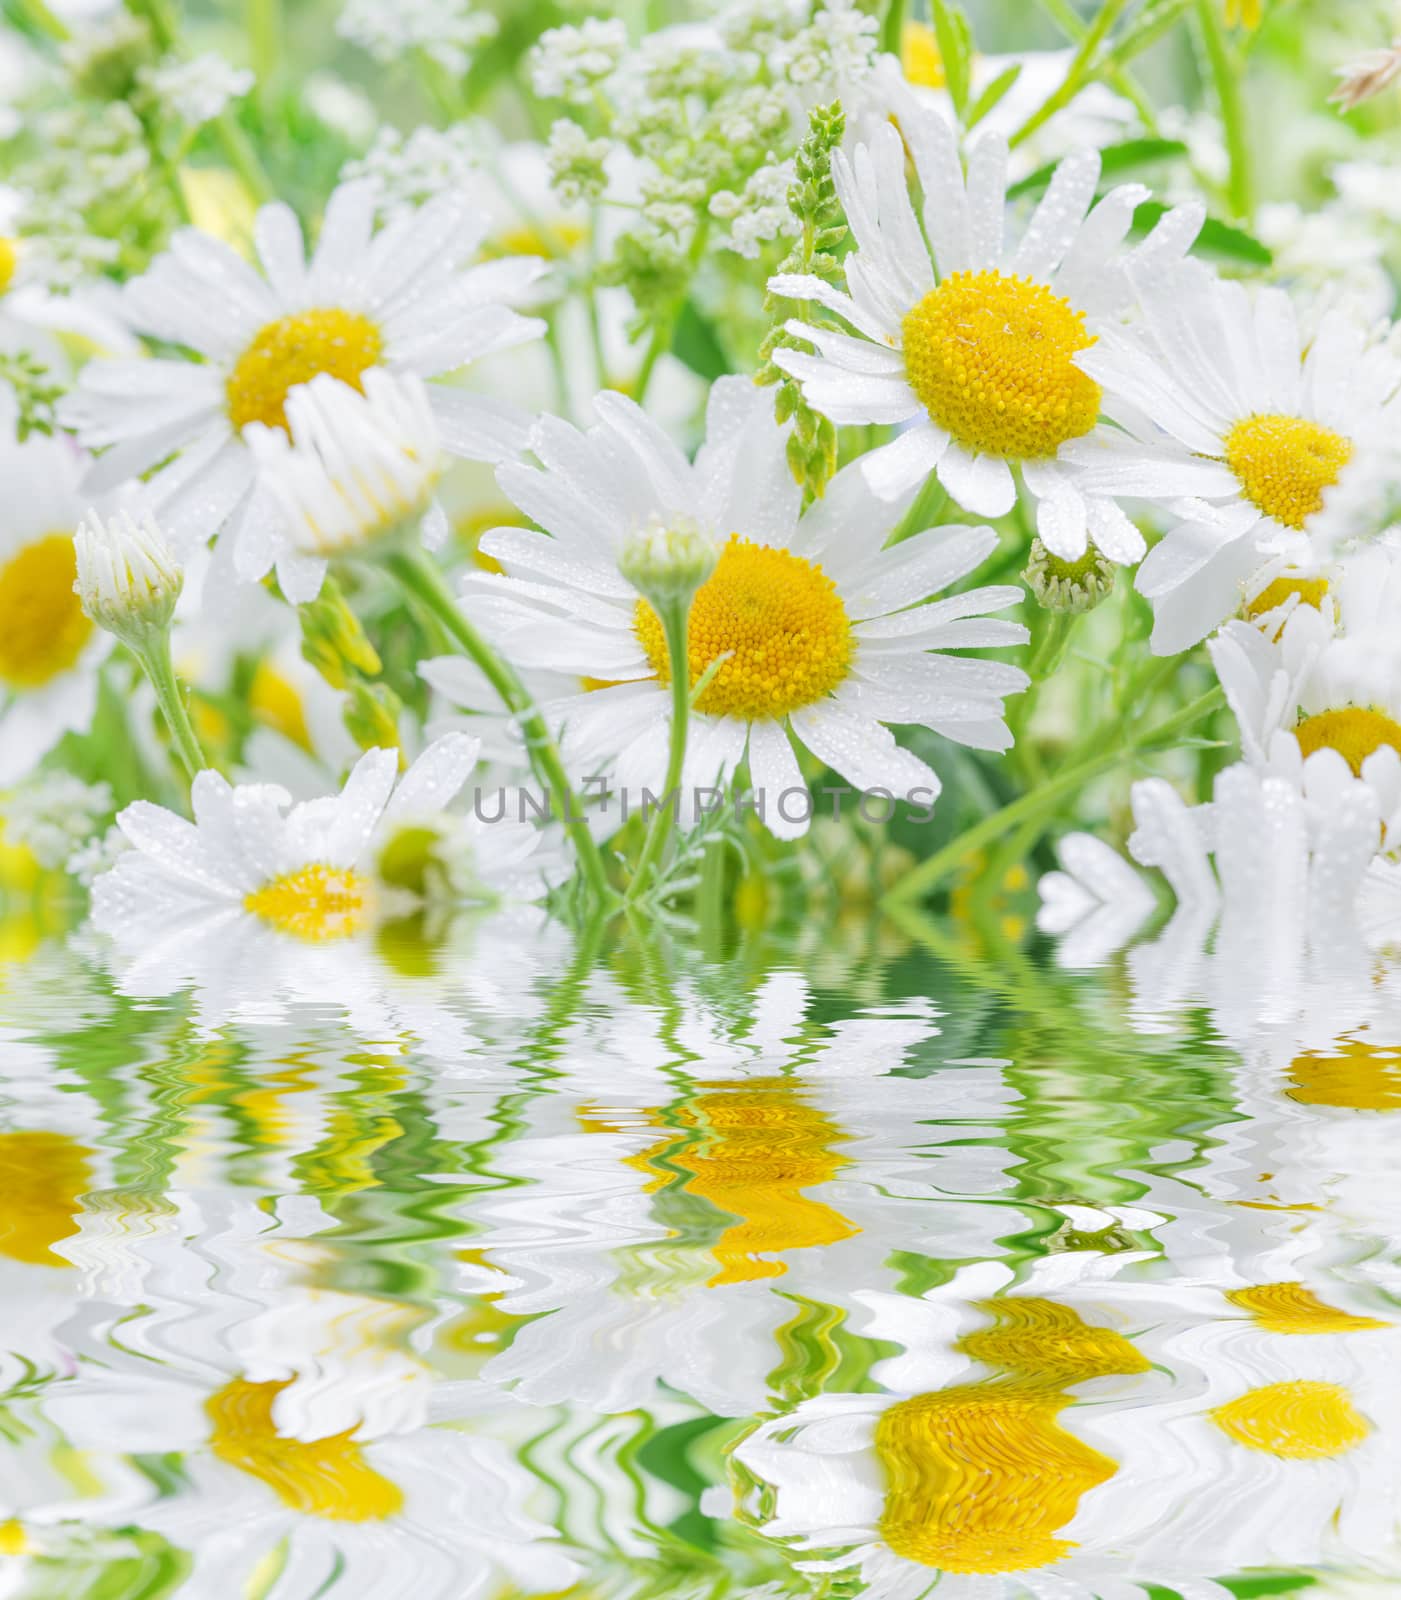 Daisies covered dew drops reflected in a water by Epitavi